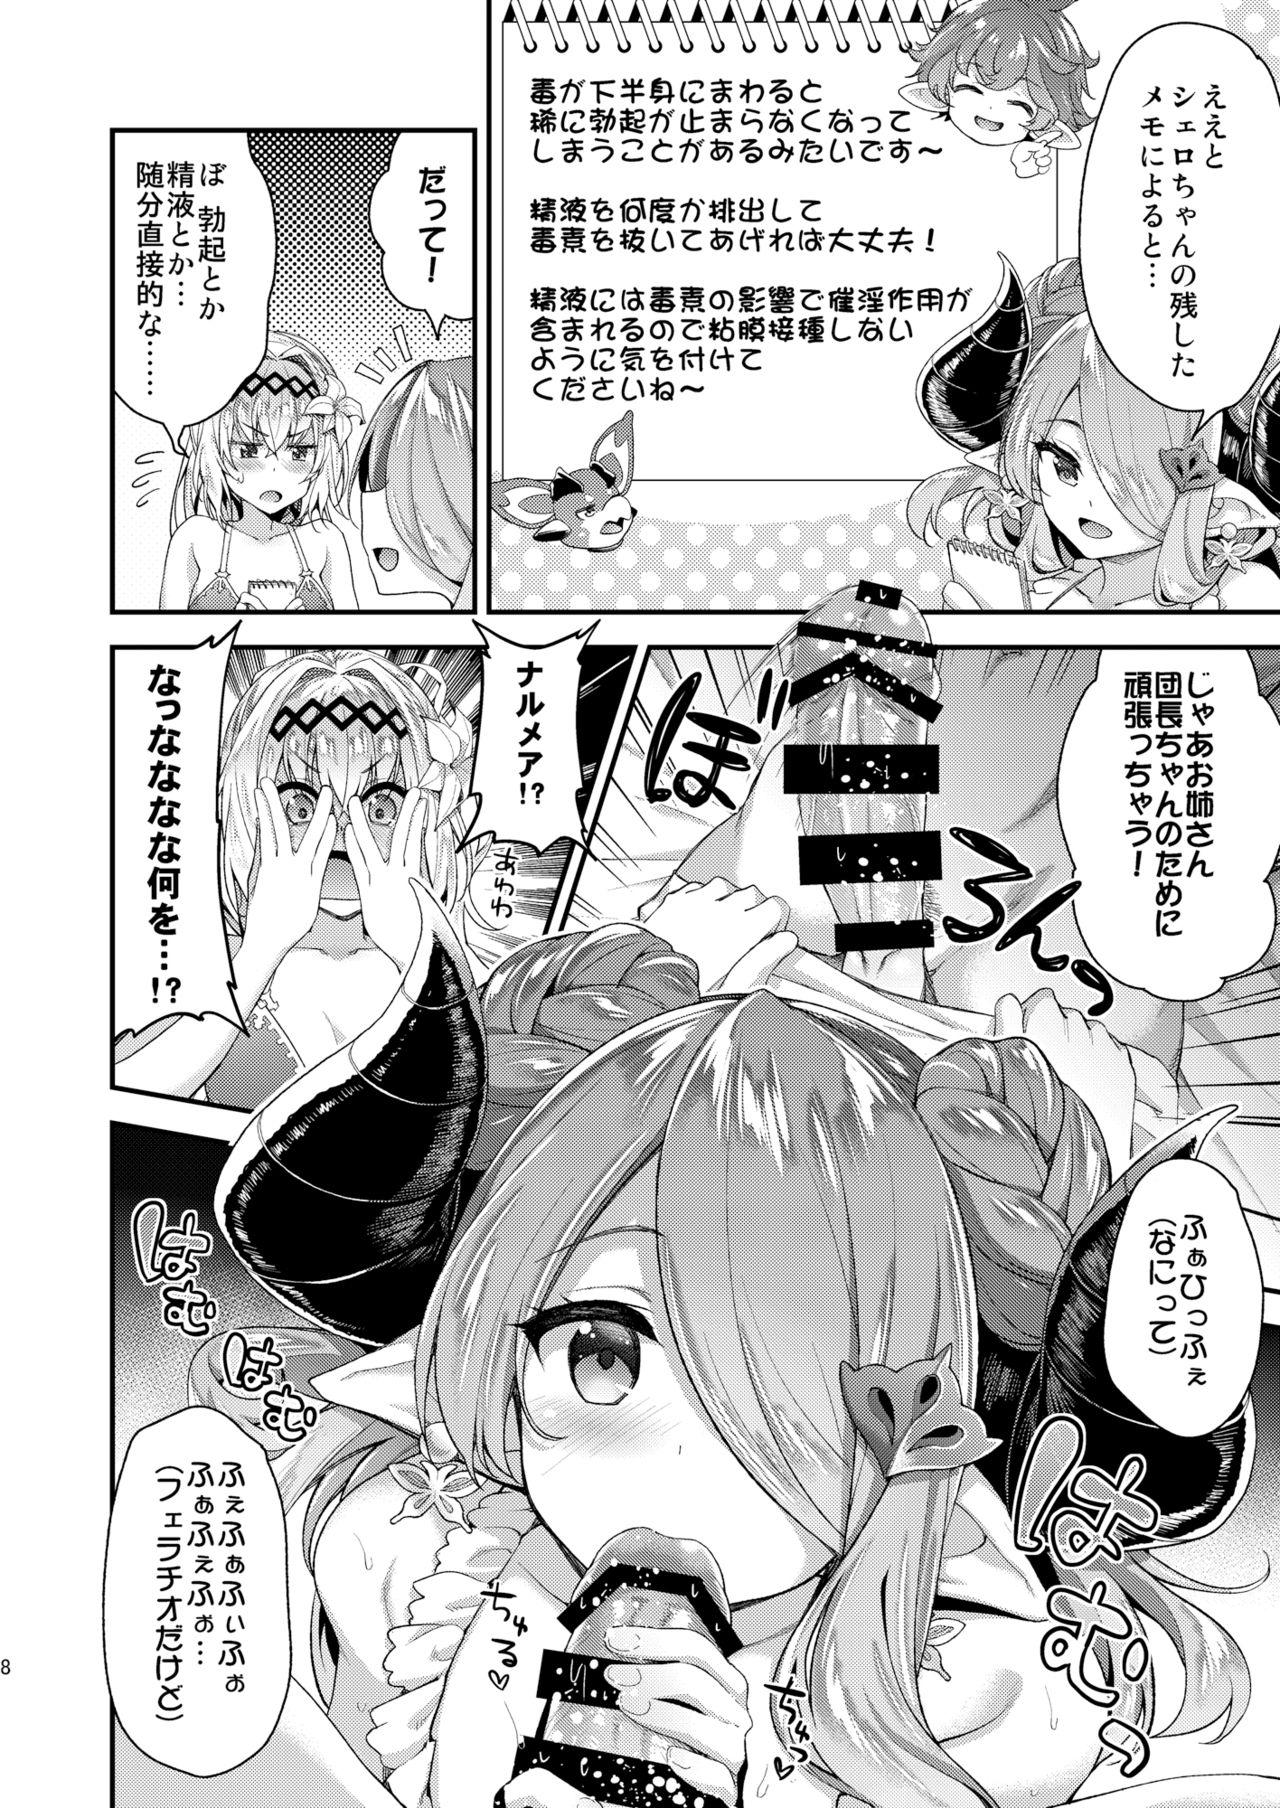 Riding Cock Narmaya & Jeanne to Dokidoki Summer Vacation - Granblue fantasy Interview - Page 5